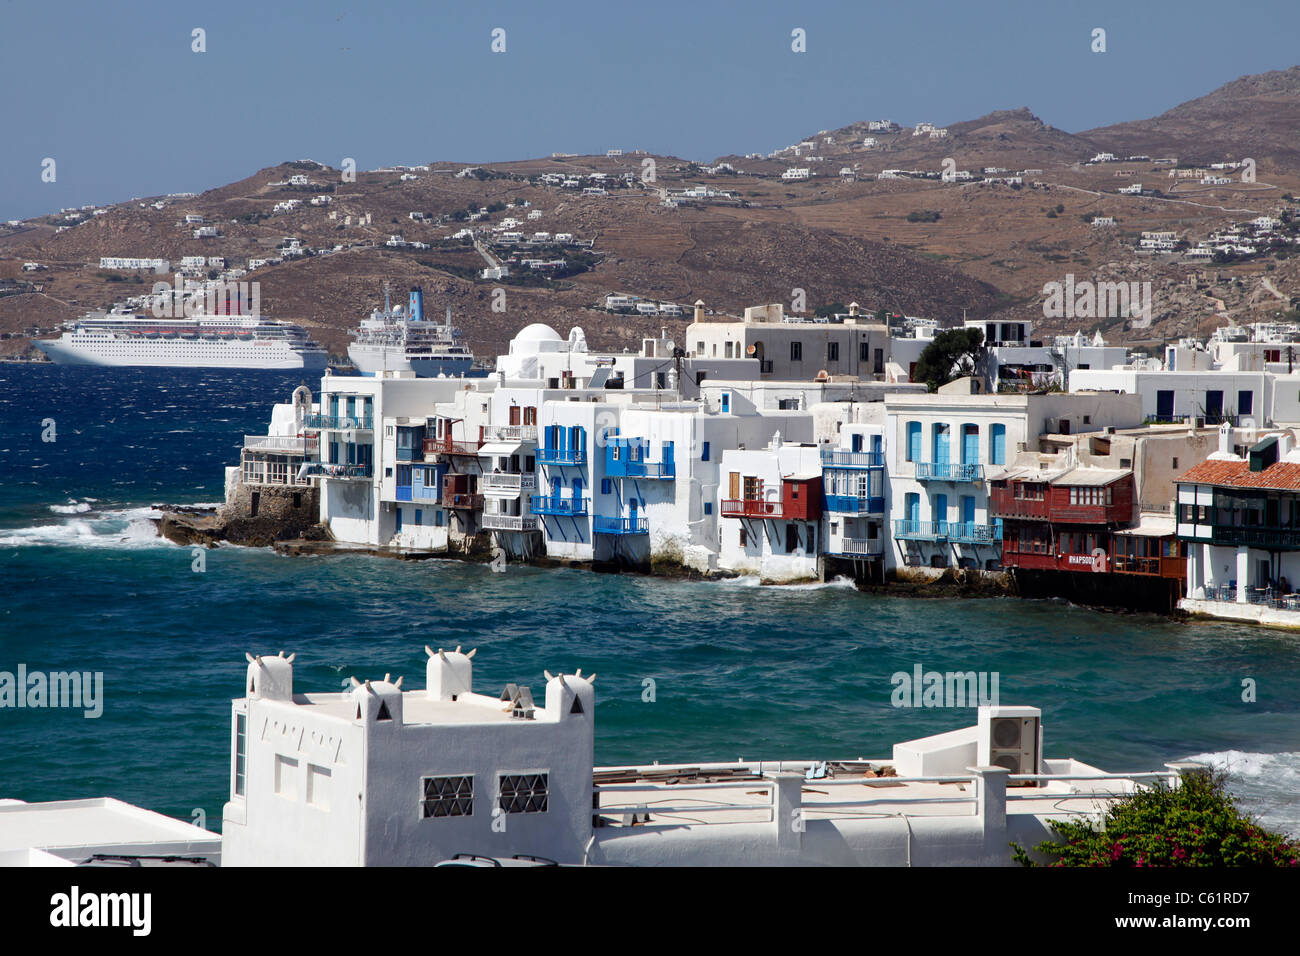 Mykonos, Greek island, part of the Cyclades. View over Mykonos city, old town and bay. Stock Photo